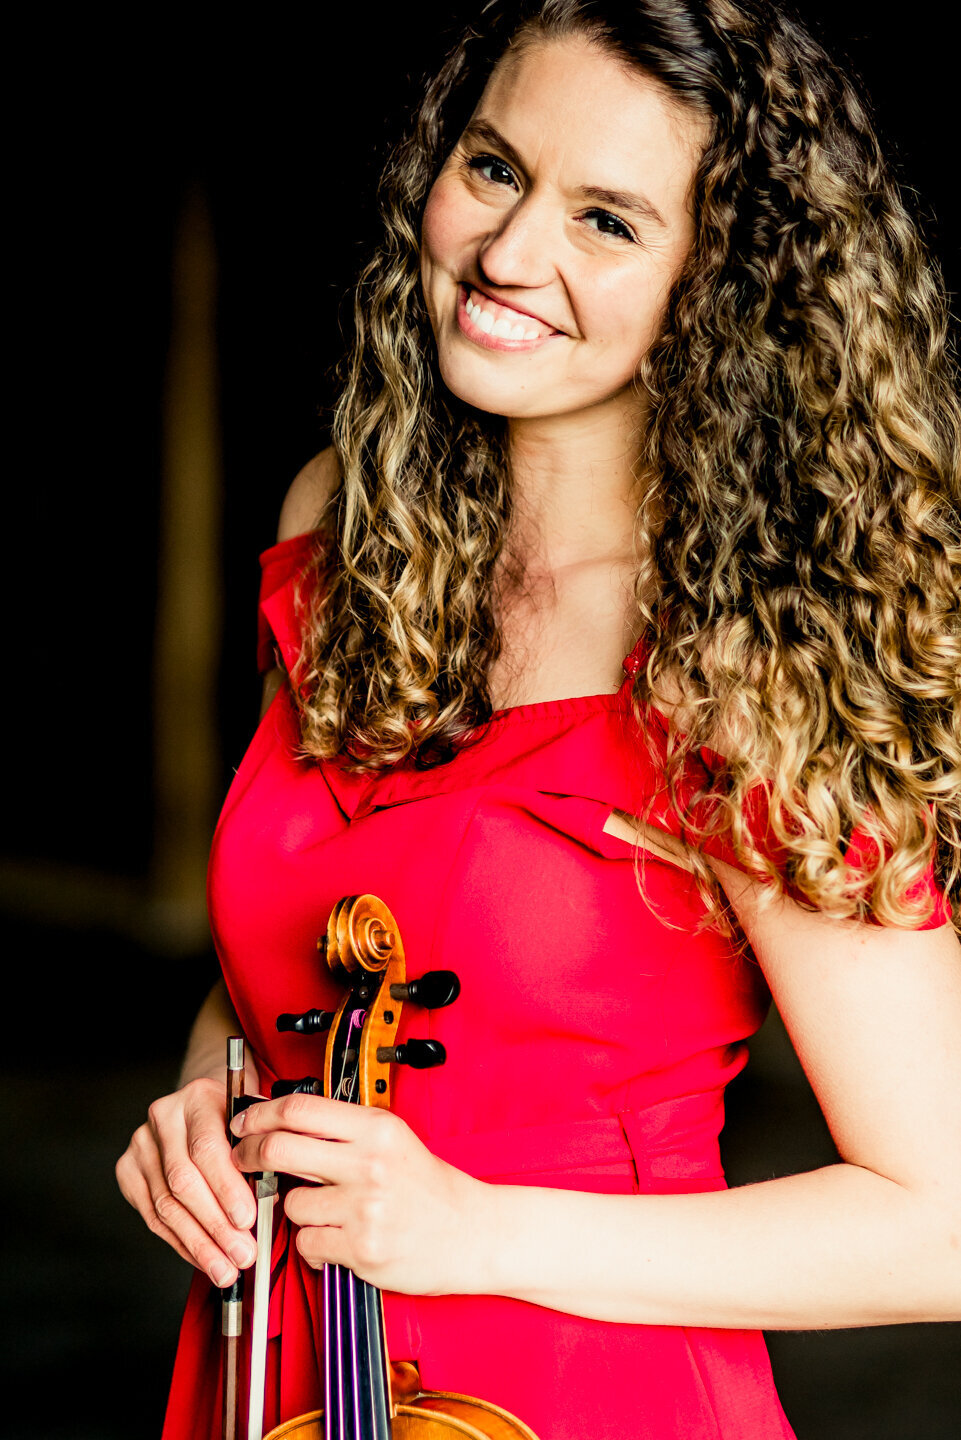 woman smiling with violin